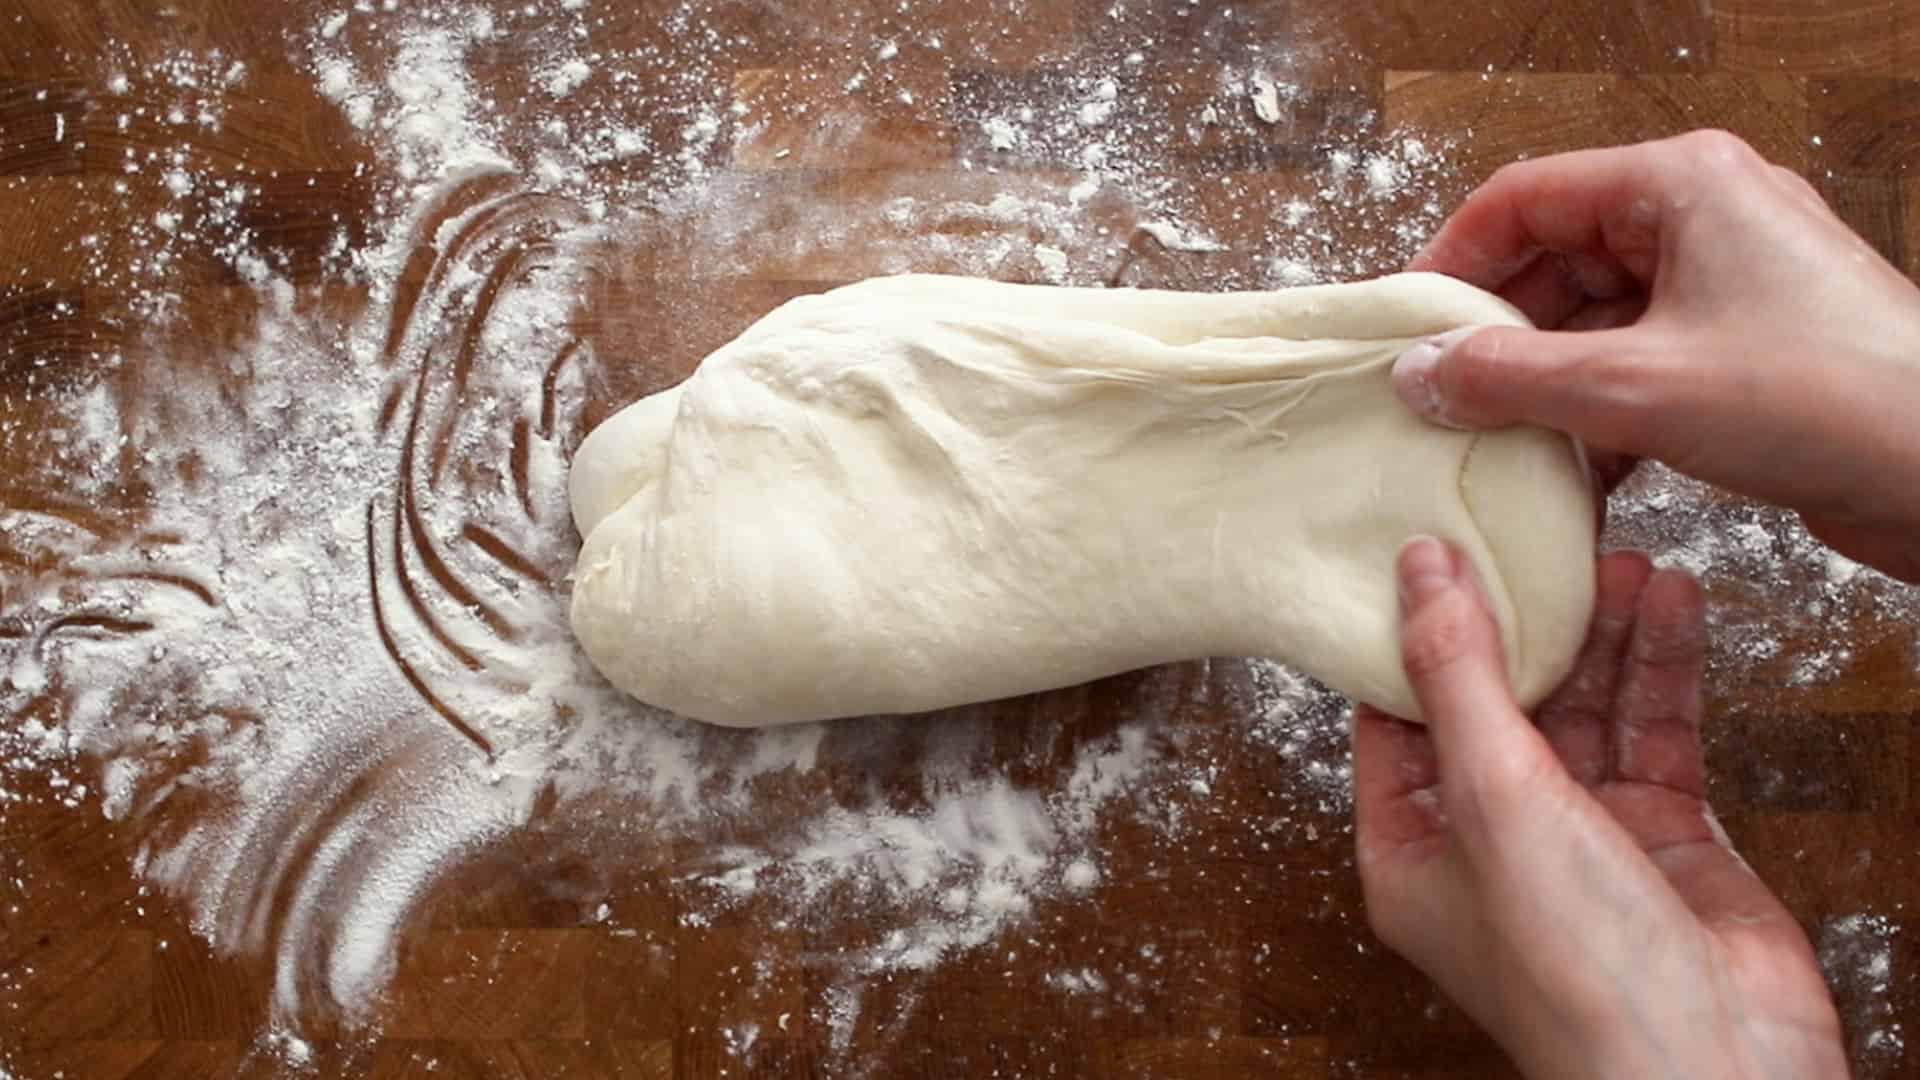 Stretching the right side of the dough